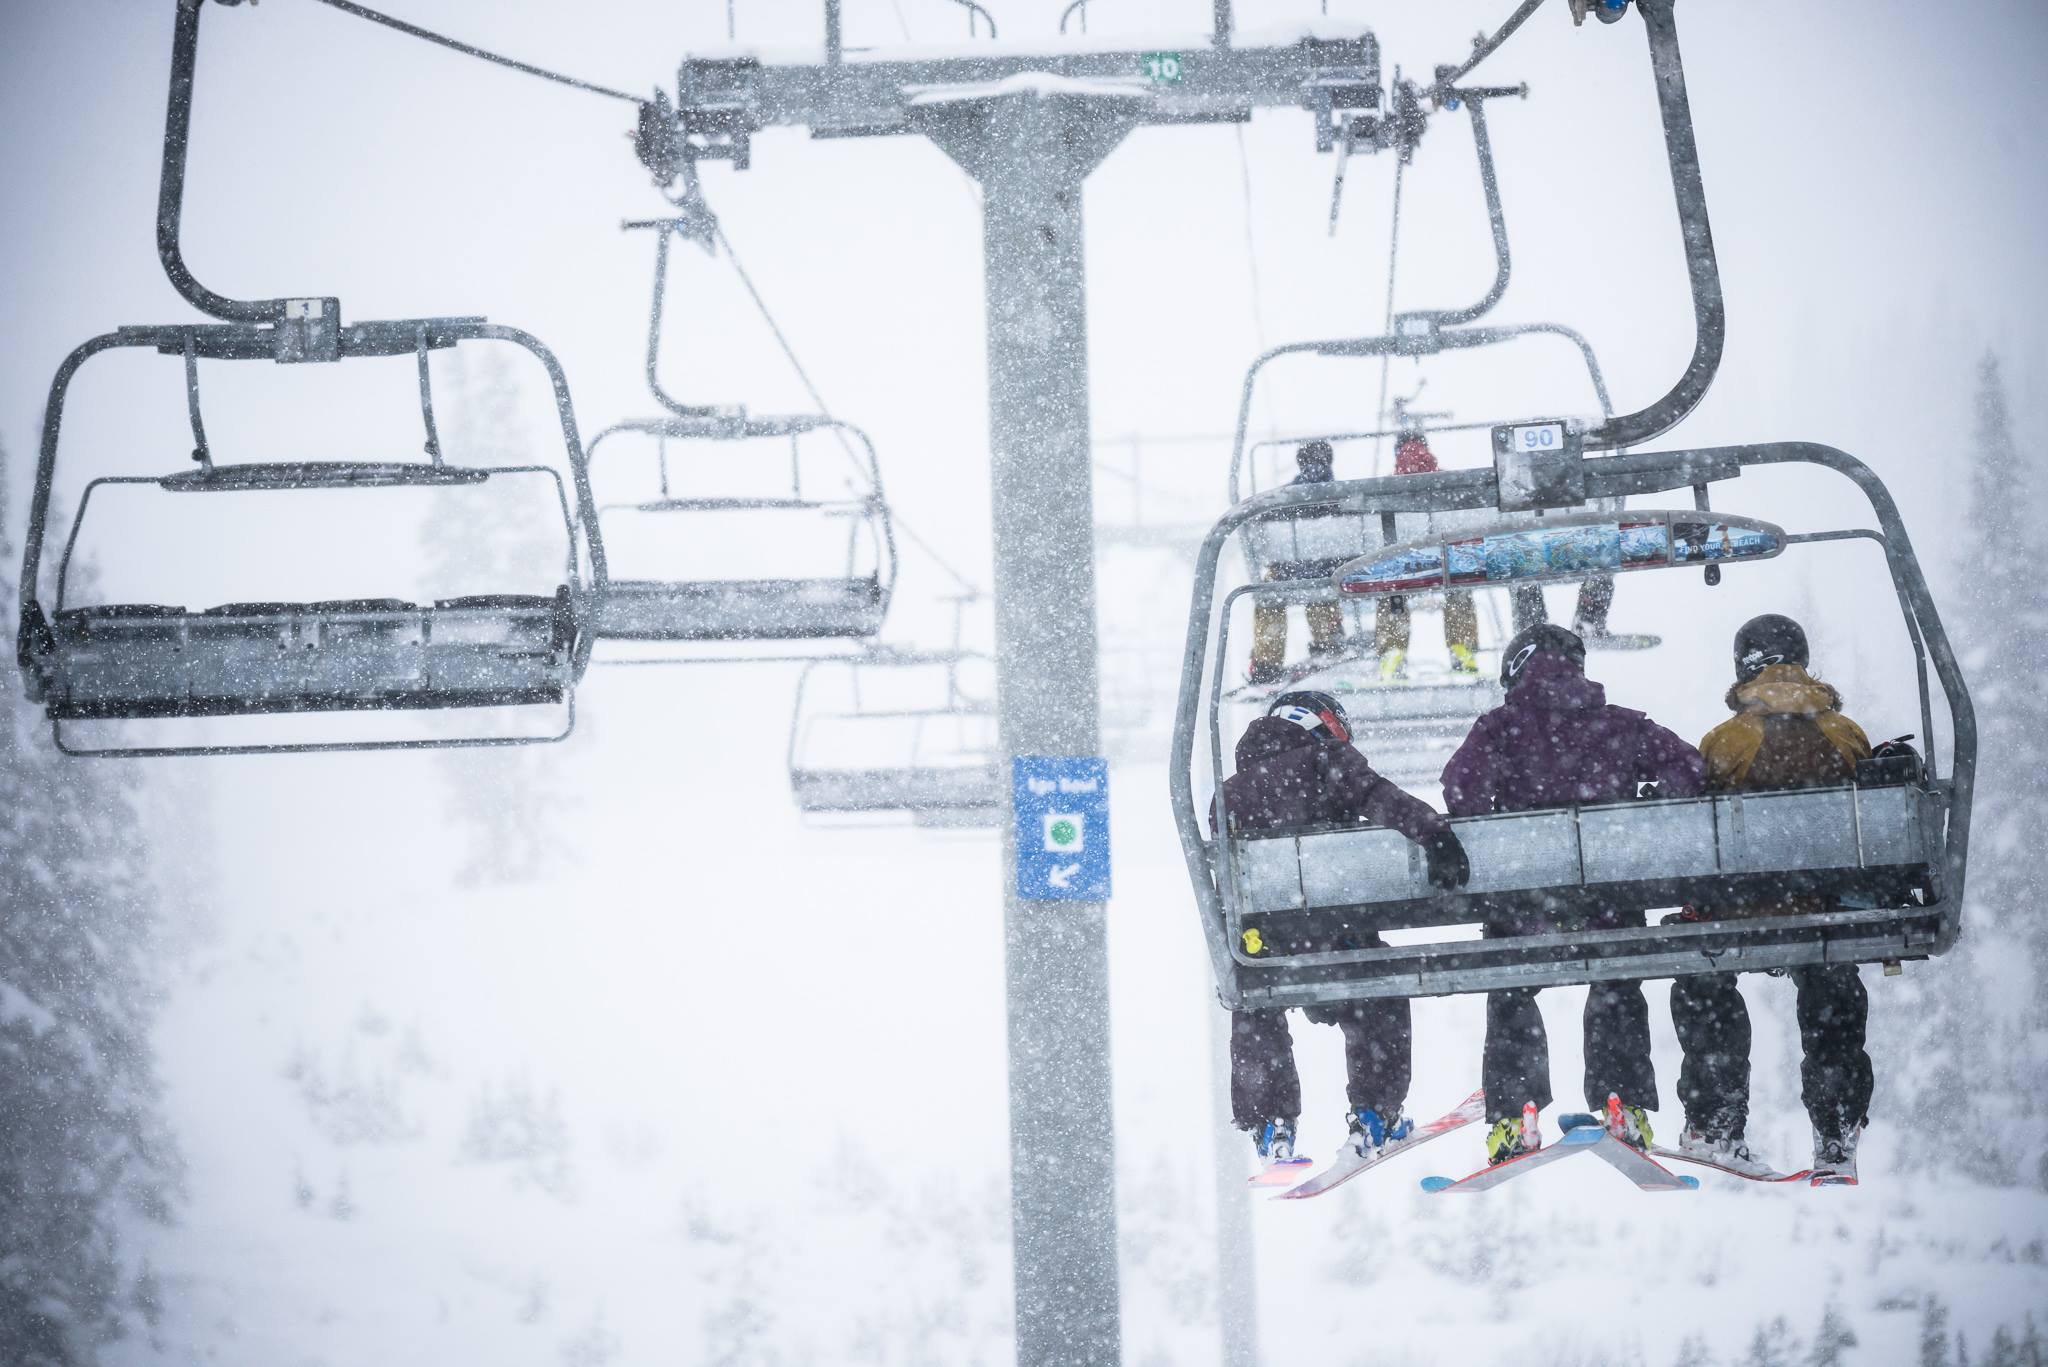 There are friends on a POWDER Day.. at least on the chairlift! PC: Andrew Strain